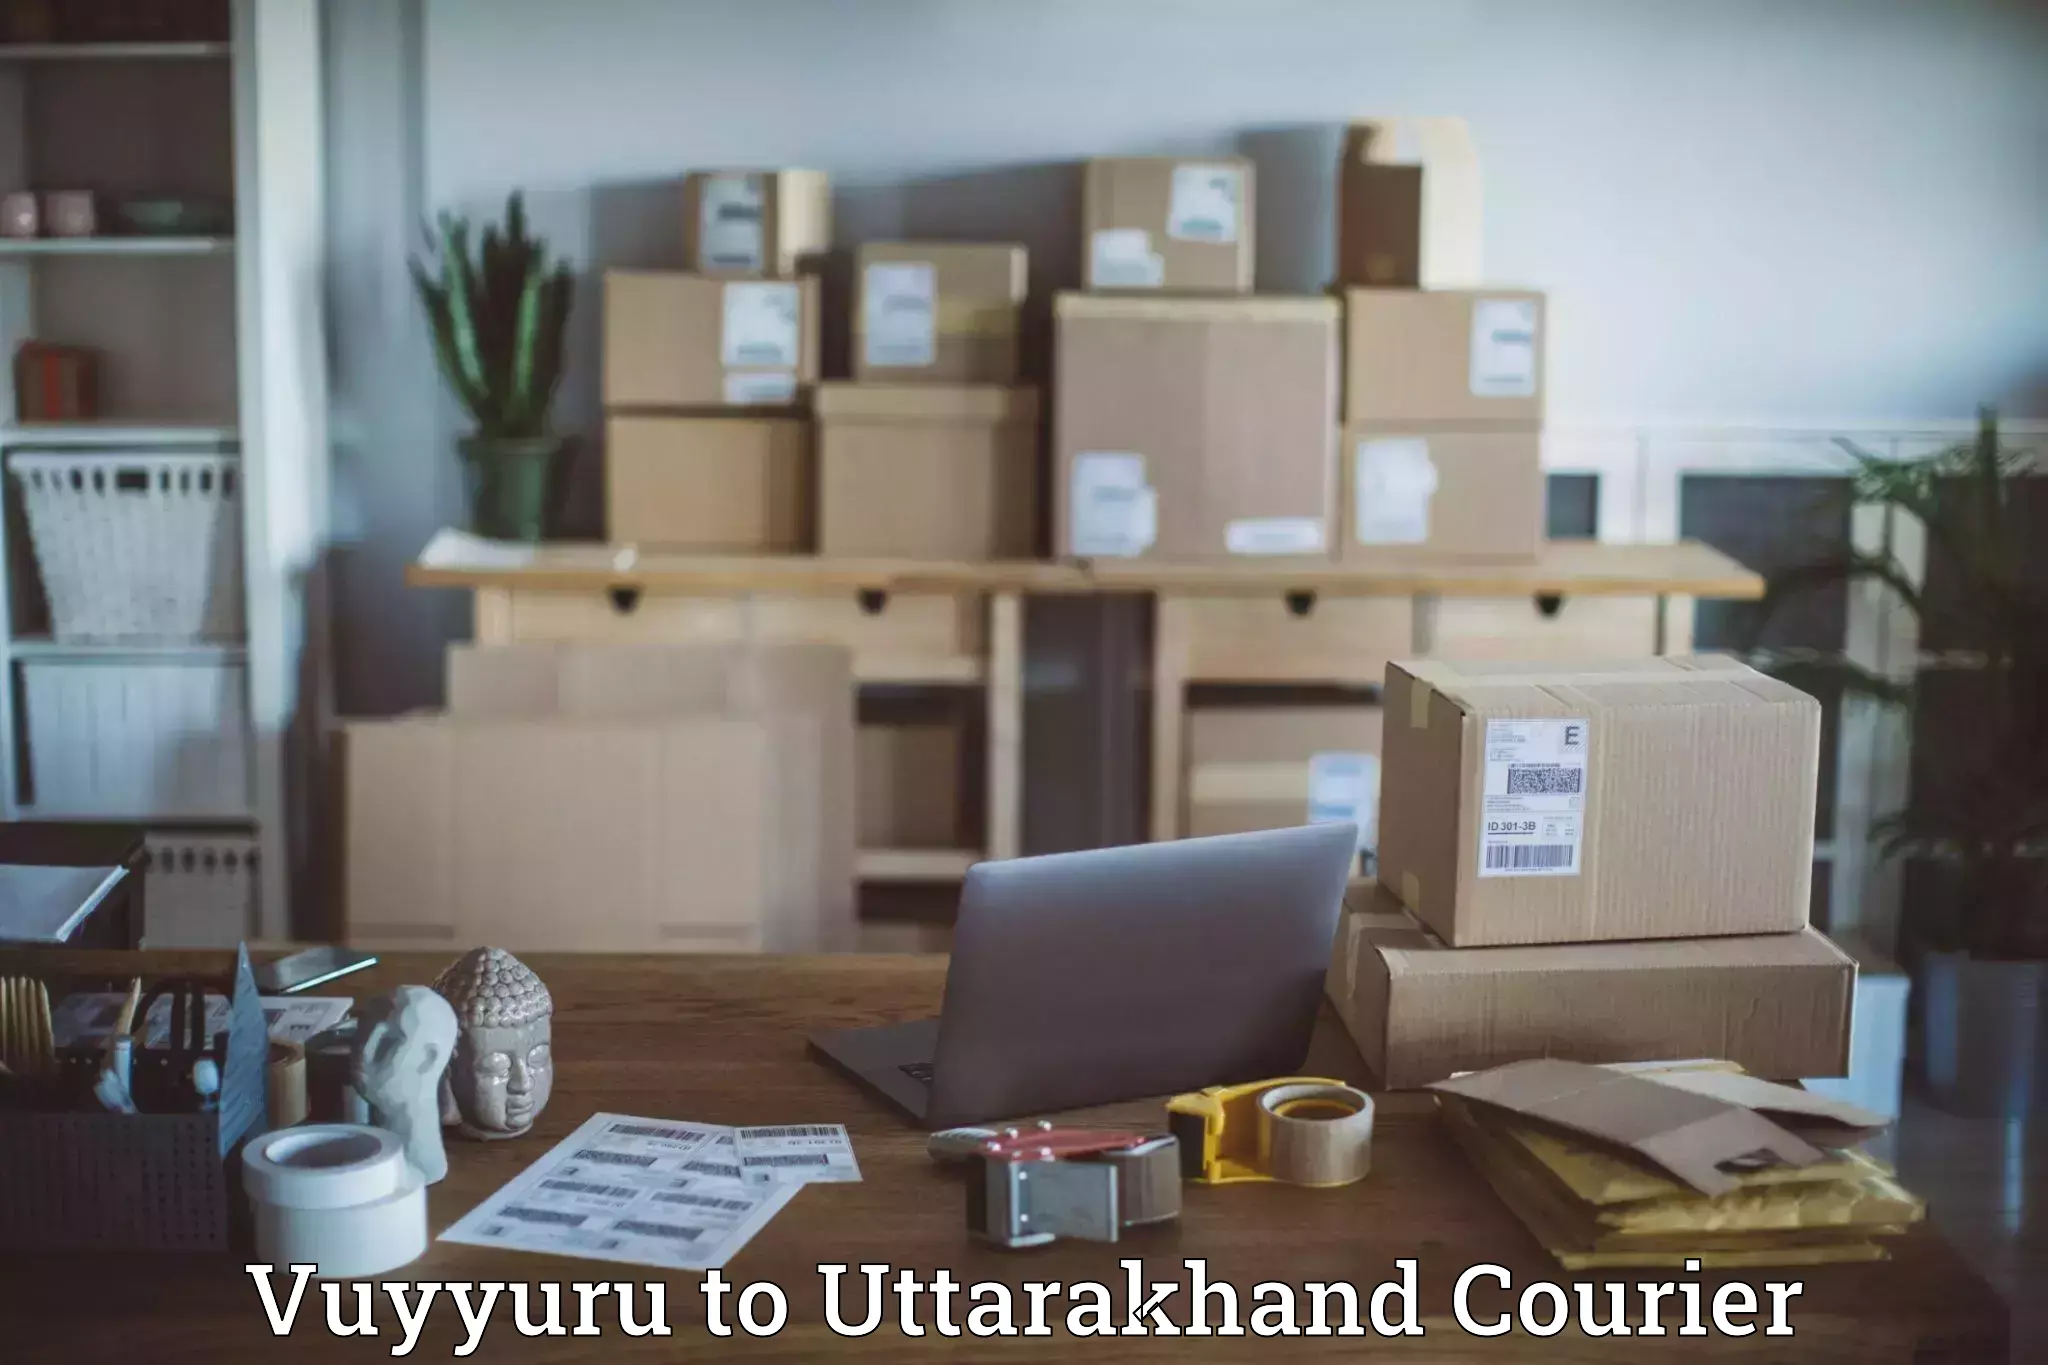 End-to-end delivery Vuyyuru to Uttarakhand